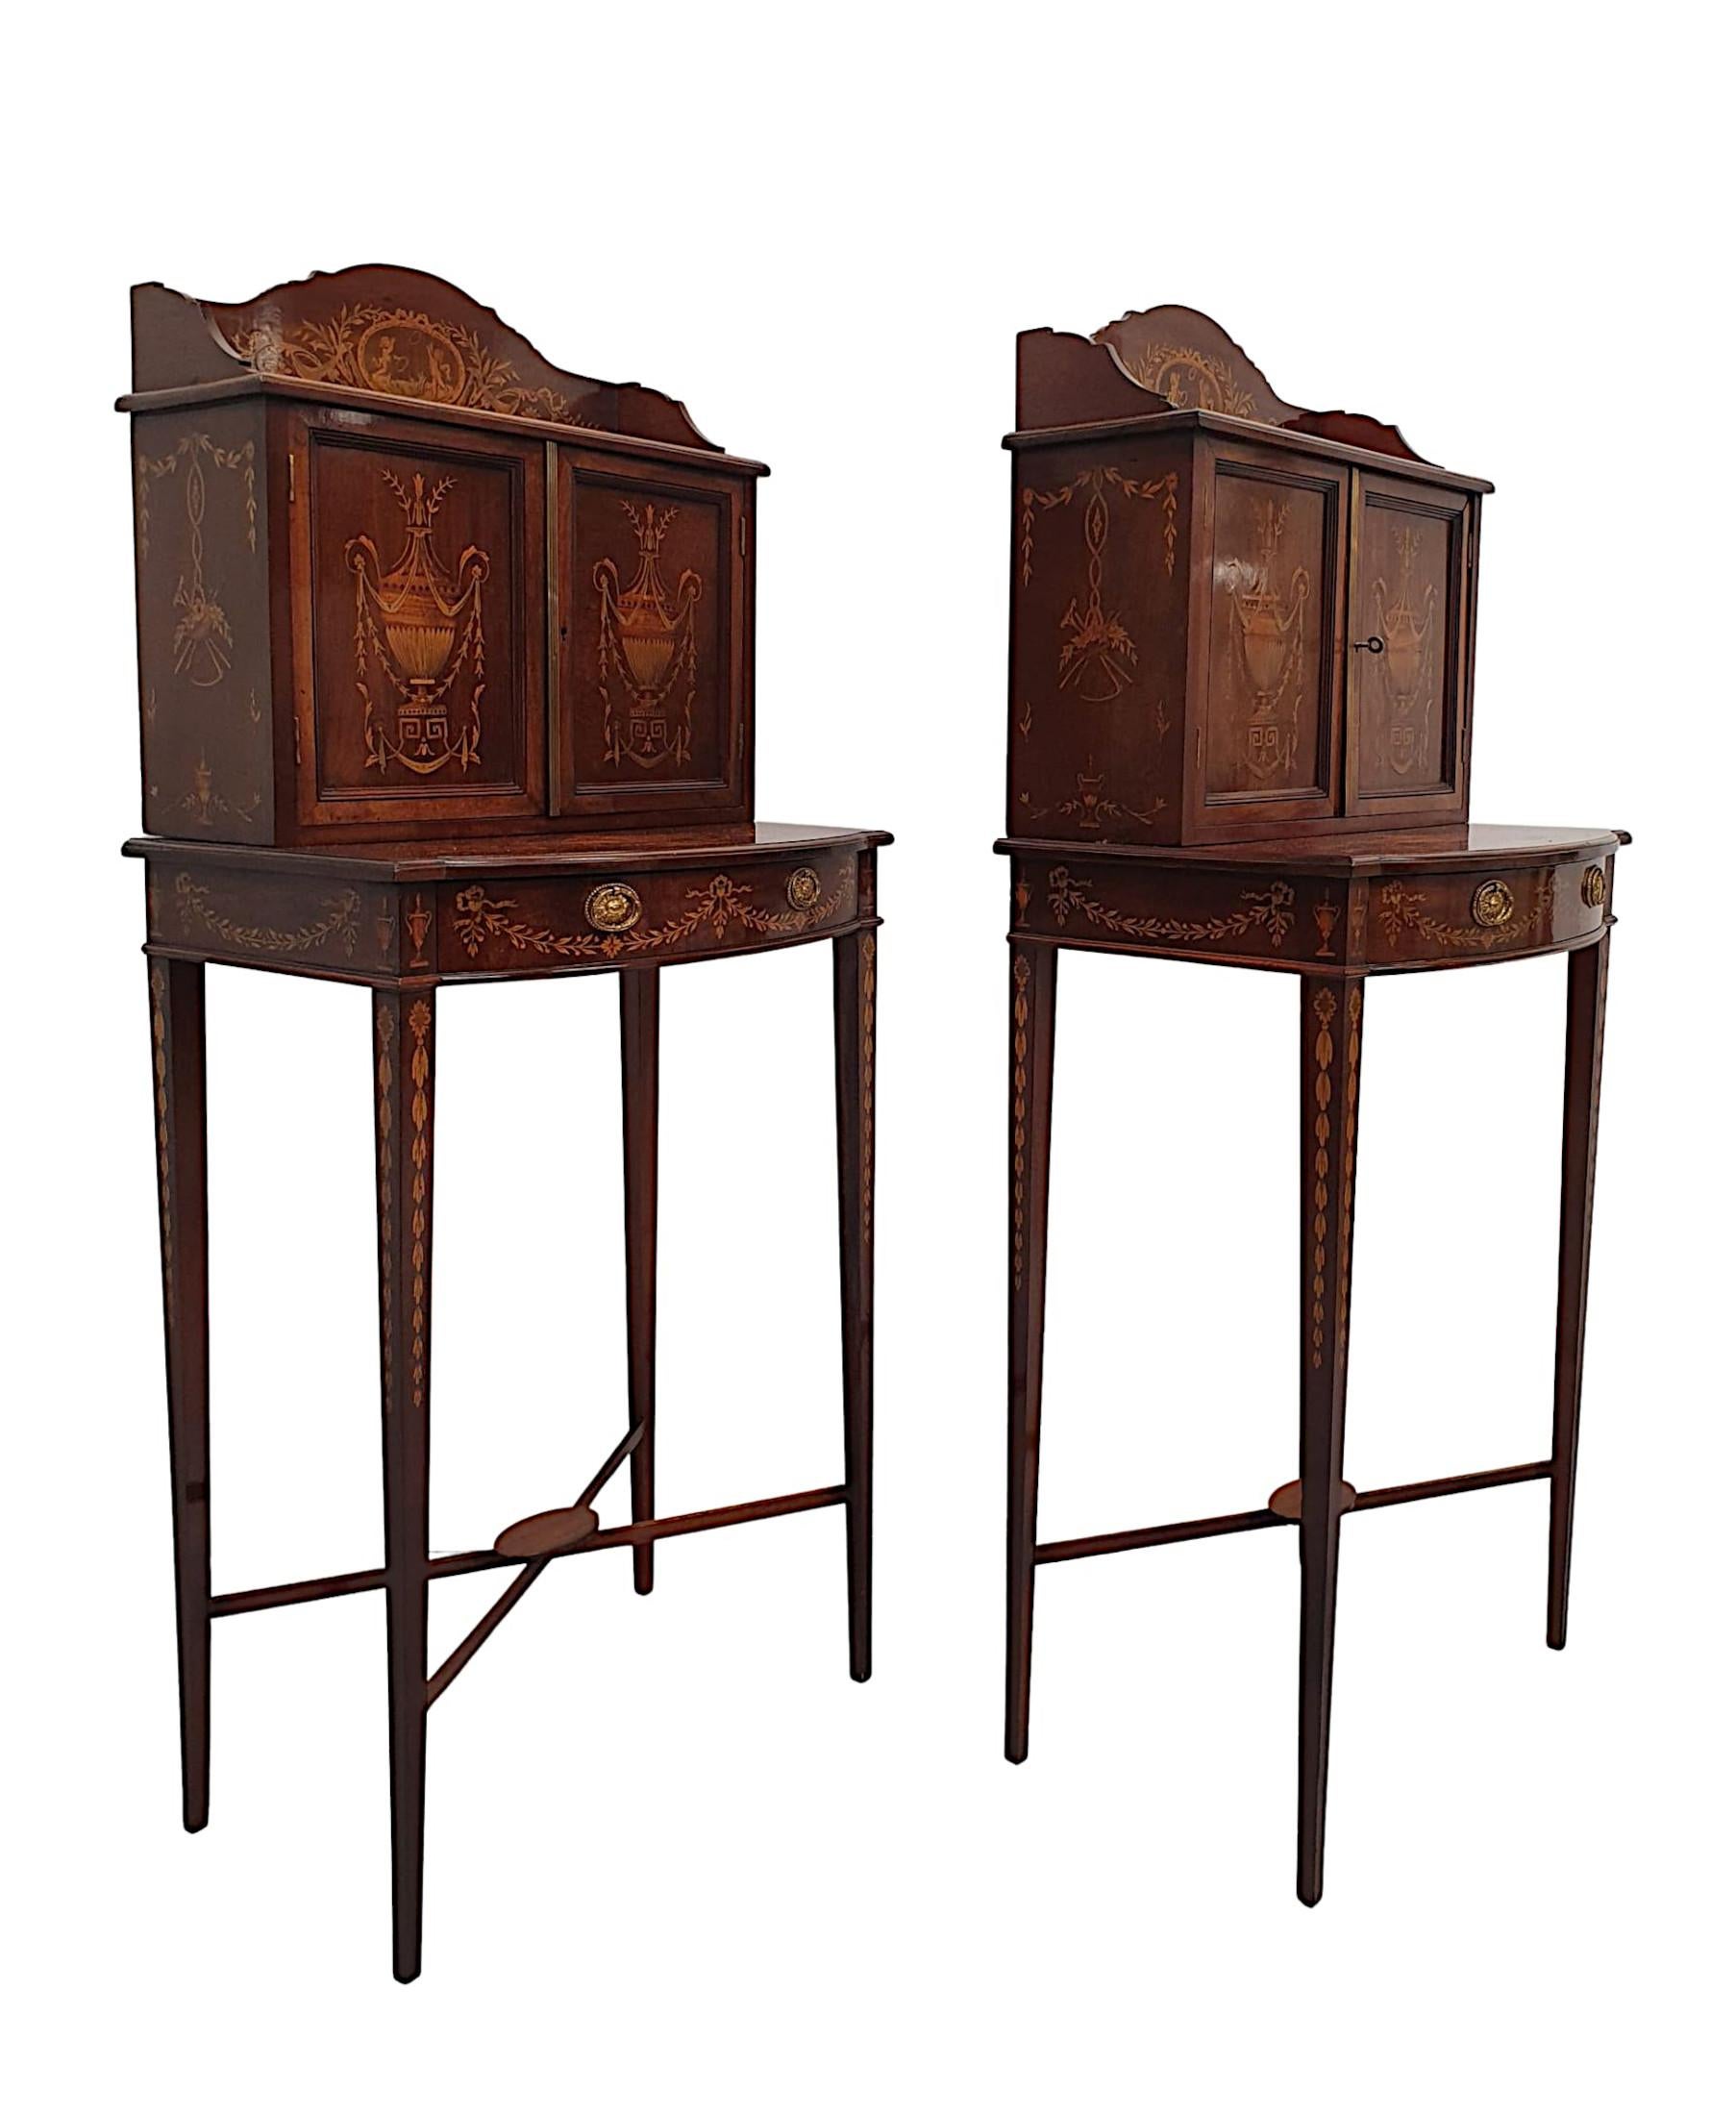 An extremely rare pair of exceptional mahogany side cabinets attributed to Edwards and Roberts, fabulously carved with gorgeously rich patination and grain. Beautifully detailed, crossbanded and inlaid with intricate marquetry work depicting